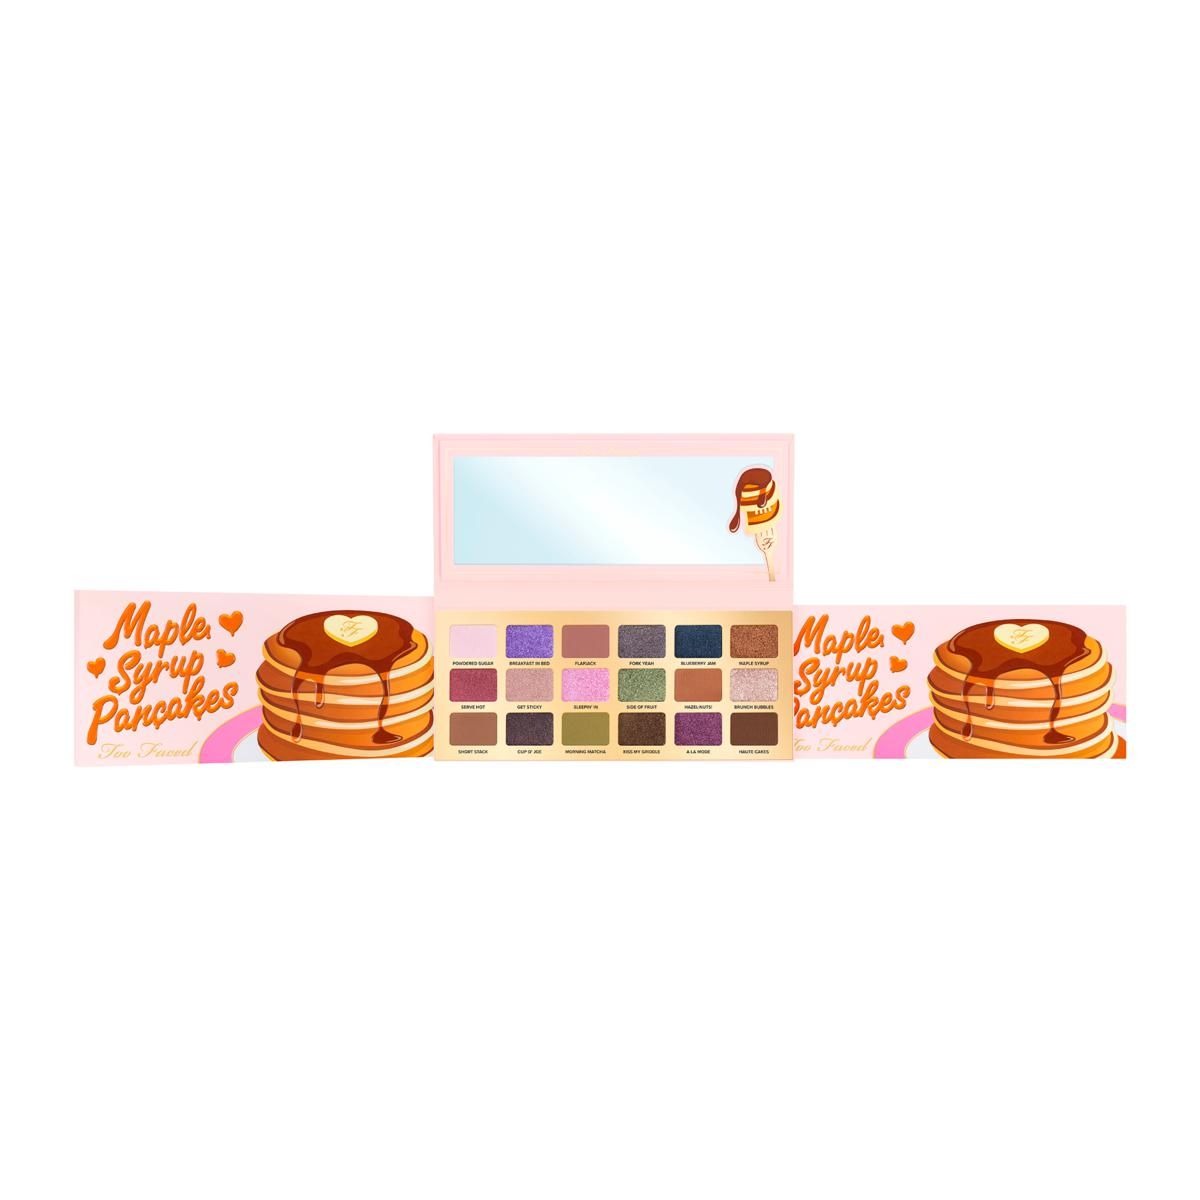 Too Faced Maple Syrup Pancakes Eye Shadow Palette - 21869411 | HSN | HSN